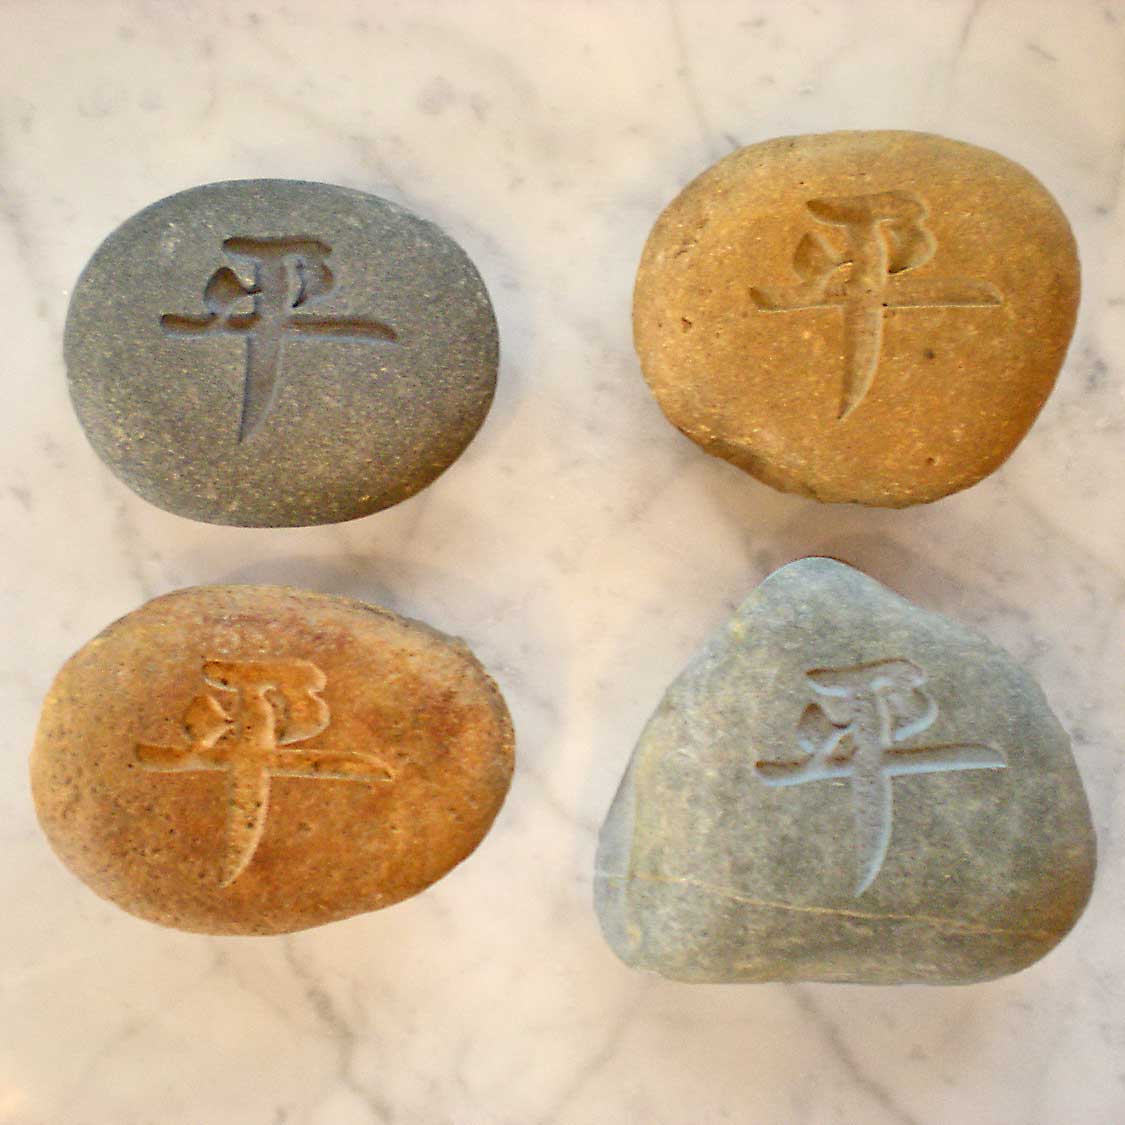 Stone Forest Peace Character Pebbles are  each uniquely carved from natural river pebbles image 2 of 8